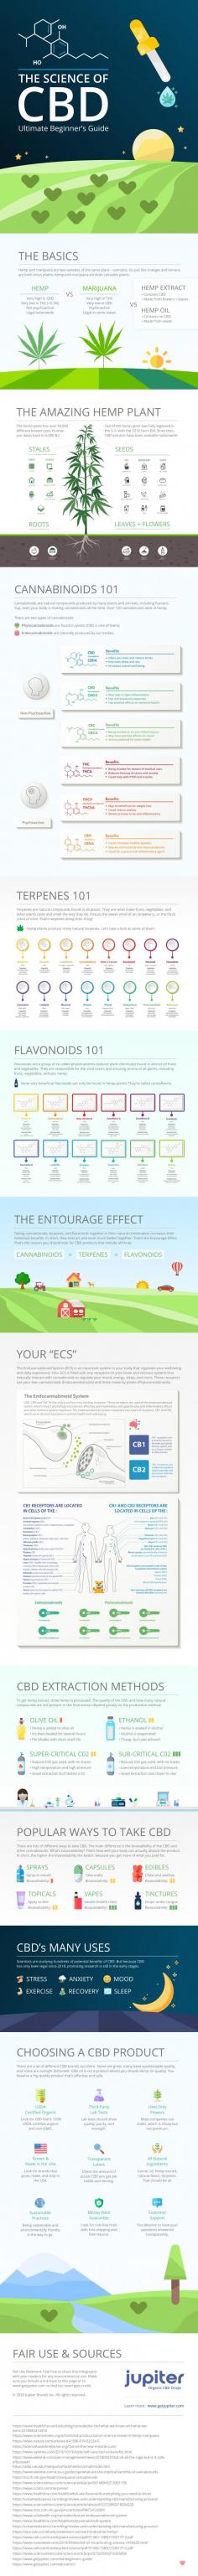 The Science of CBD & Hemp - Ultimate Beginner's Guide

The Science of CBD - Discover everything you need to know about CBD and hemp with this illustrated beginner’s guide. This infographic shows you where CBD comes from, what it really is, how it can benefit your body and mind, and what to look for when shopping. 
Learn about the differences between hemp, cannabis, and marijuana plants and understand CBD, THC, and other cannabinoids.
Discover the many uses of the hemp plant, how natural cannabinoids are made by your body and many plants, and how your ECS works.
Understand terpenes, cannabinoids, and flavonoids and their role in fruits and vegetables.
Last but not least, learn about how hemp is extracted, how CBD is made, how it's used, and the most popular ways to take it.
This illustrated guide is a fact-based and science-focused intro that covers everything you need to know about CBD oil to make informed decisions. Brought to you by Jupiter.  
